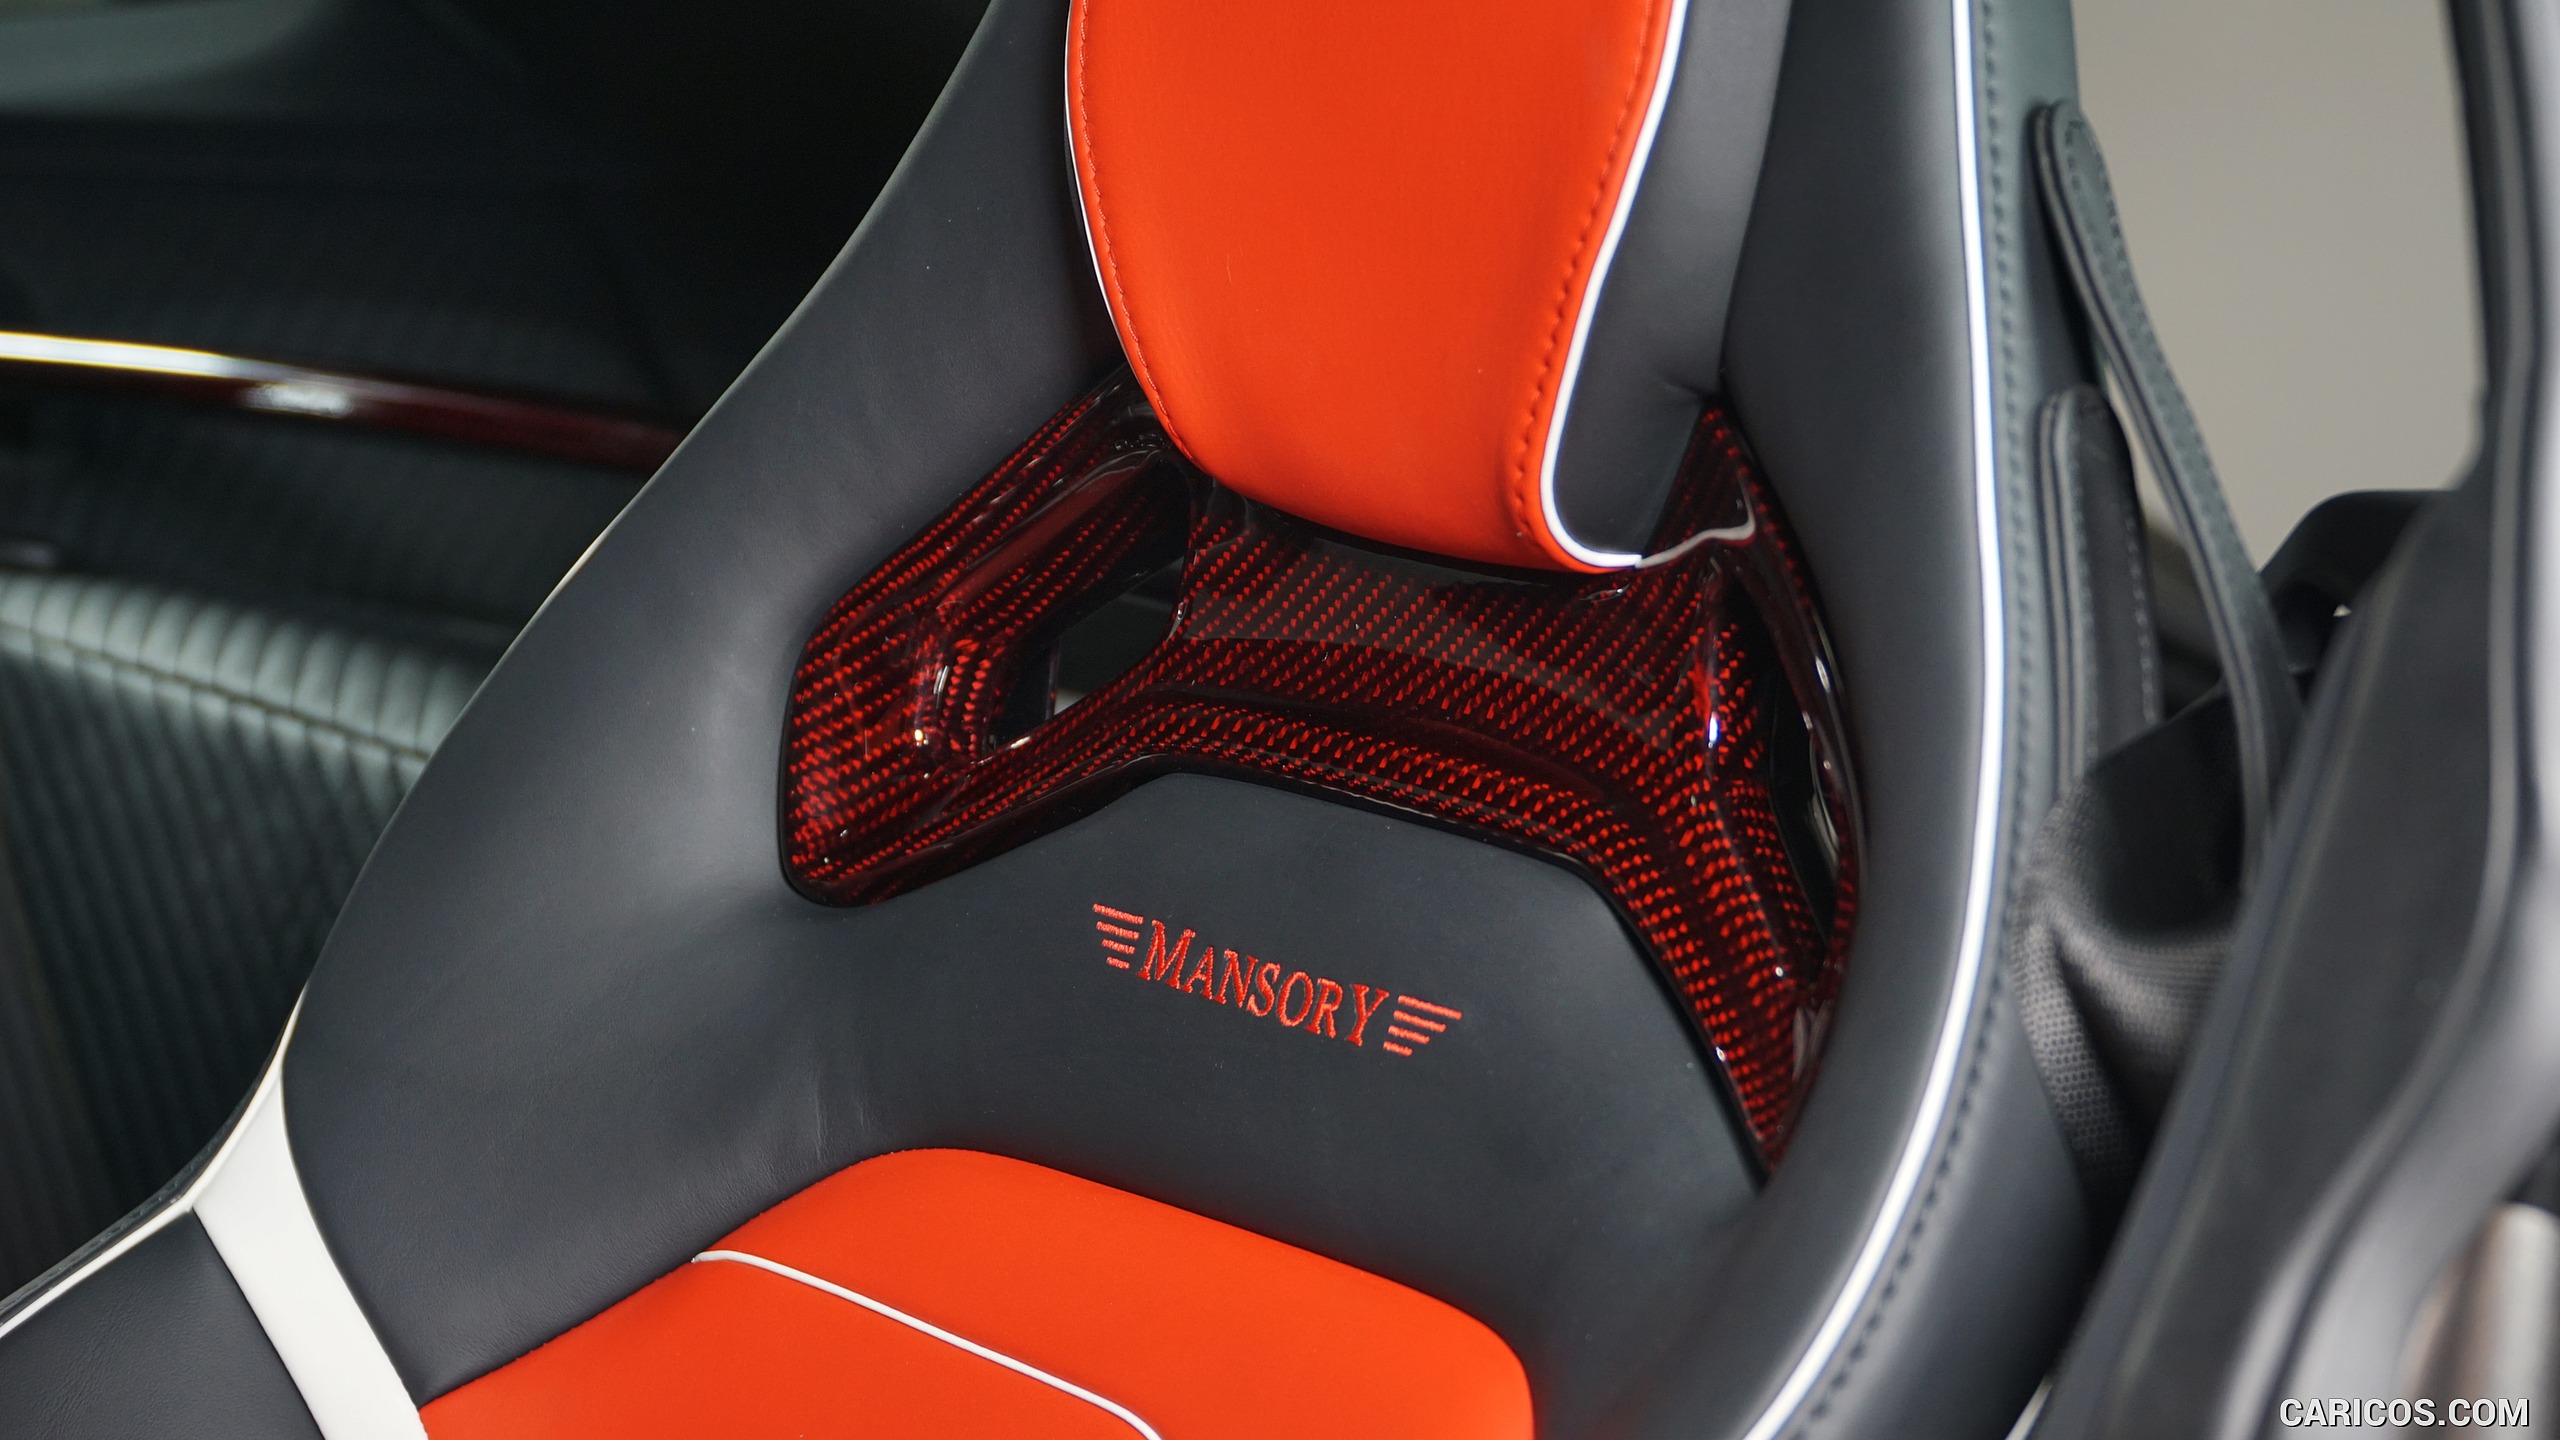 2016 MANSORY Mercedes-AMG GT S - Interior, Detail, #9 of 10